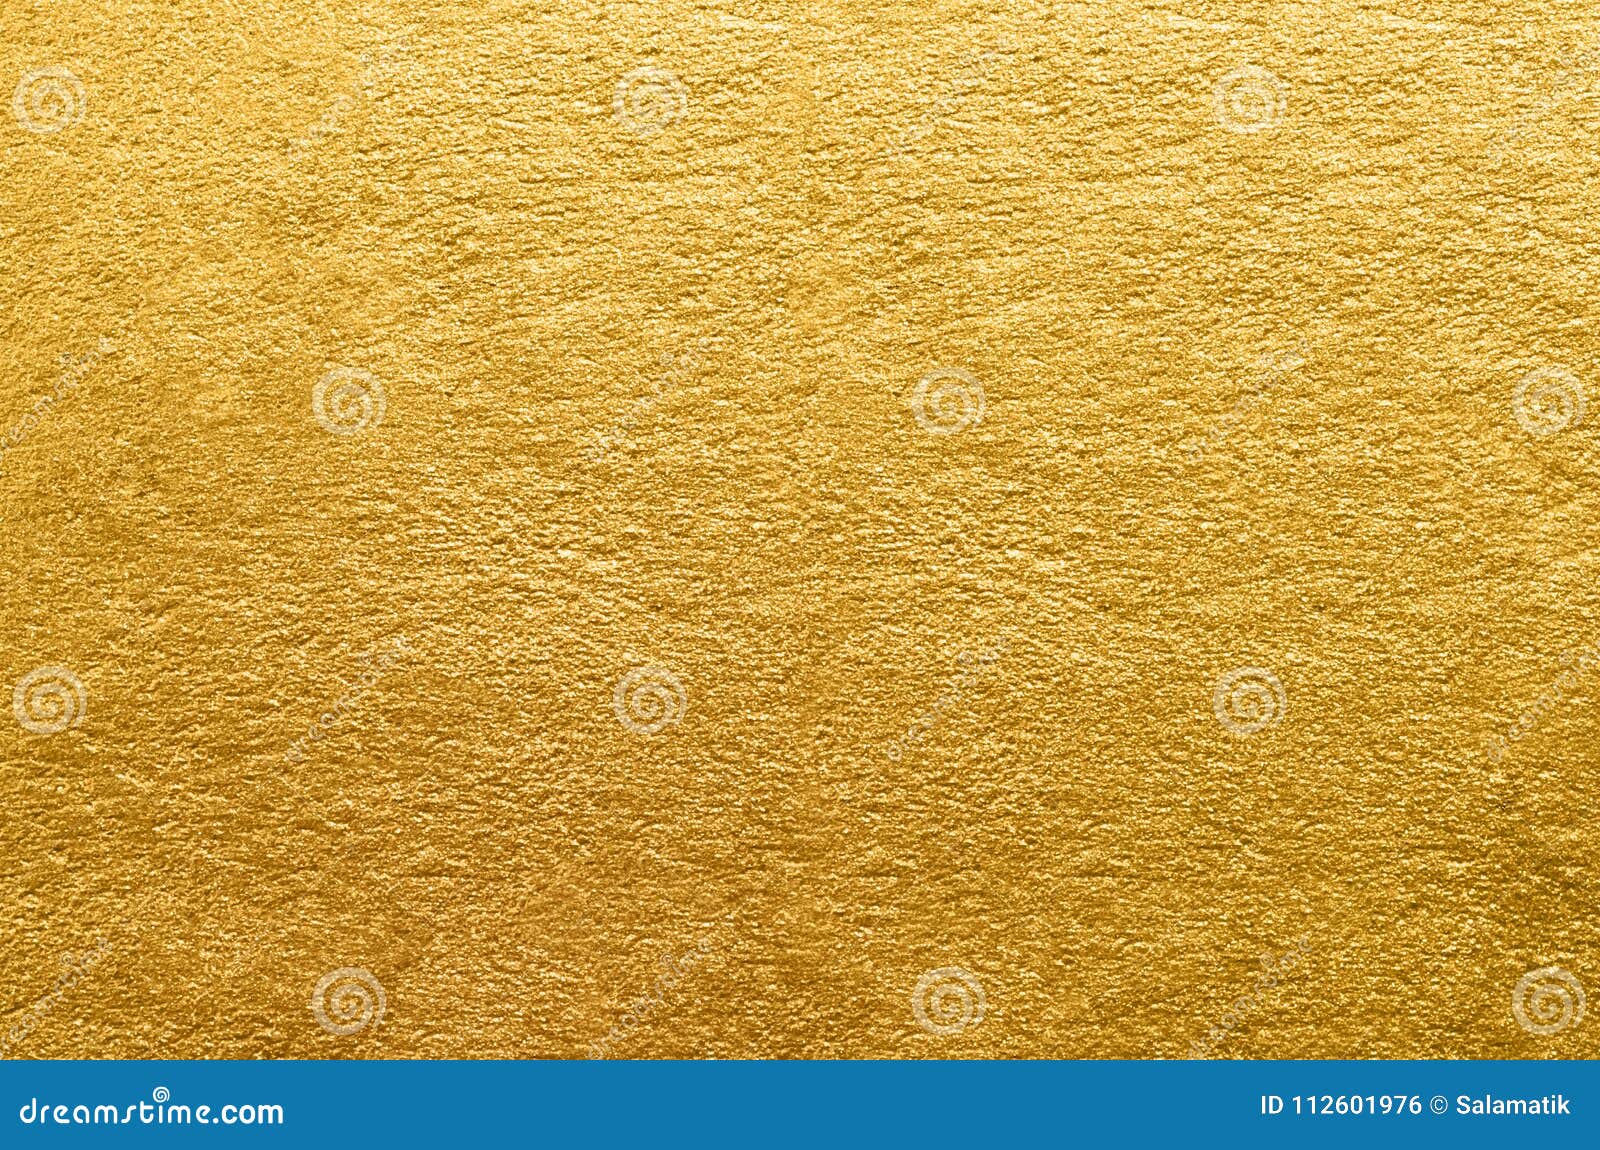 gold foil texture. golden abstract background